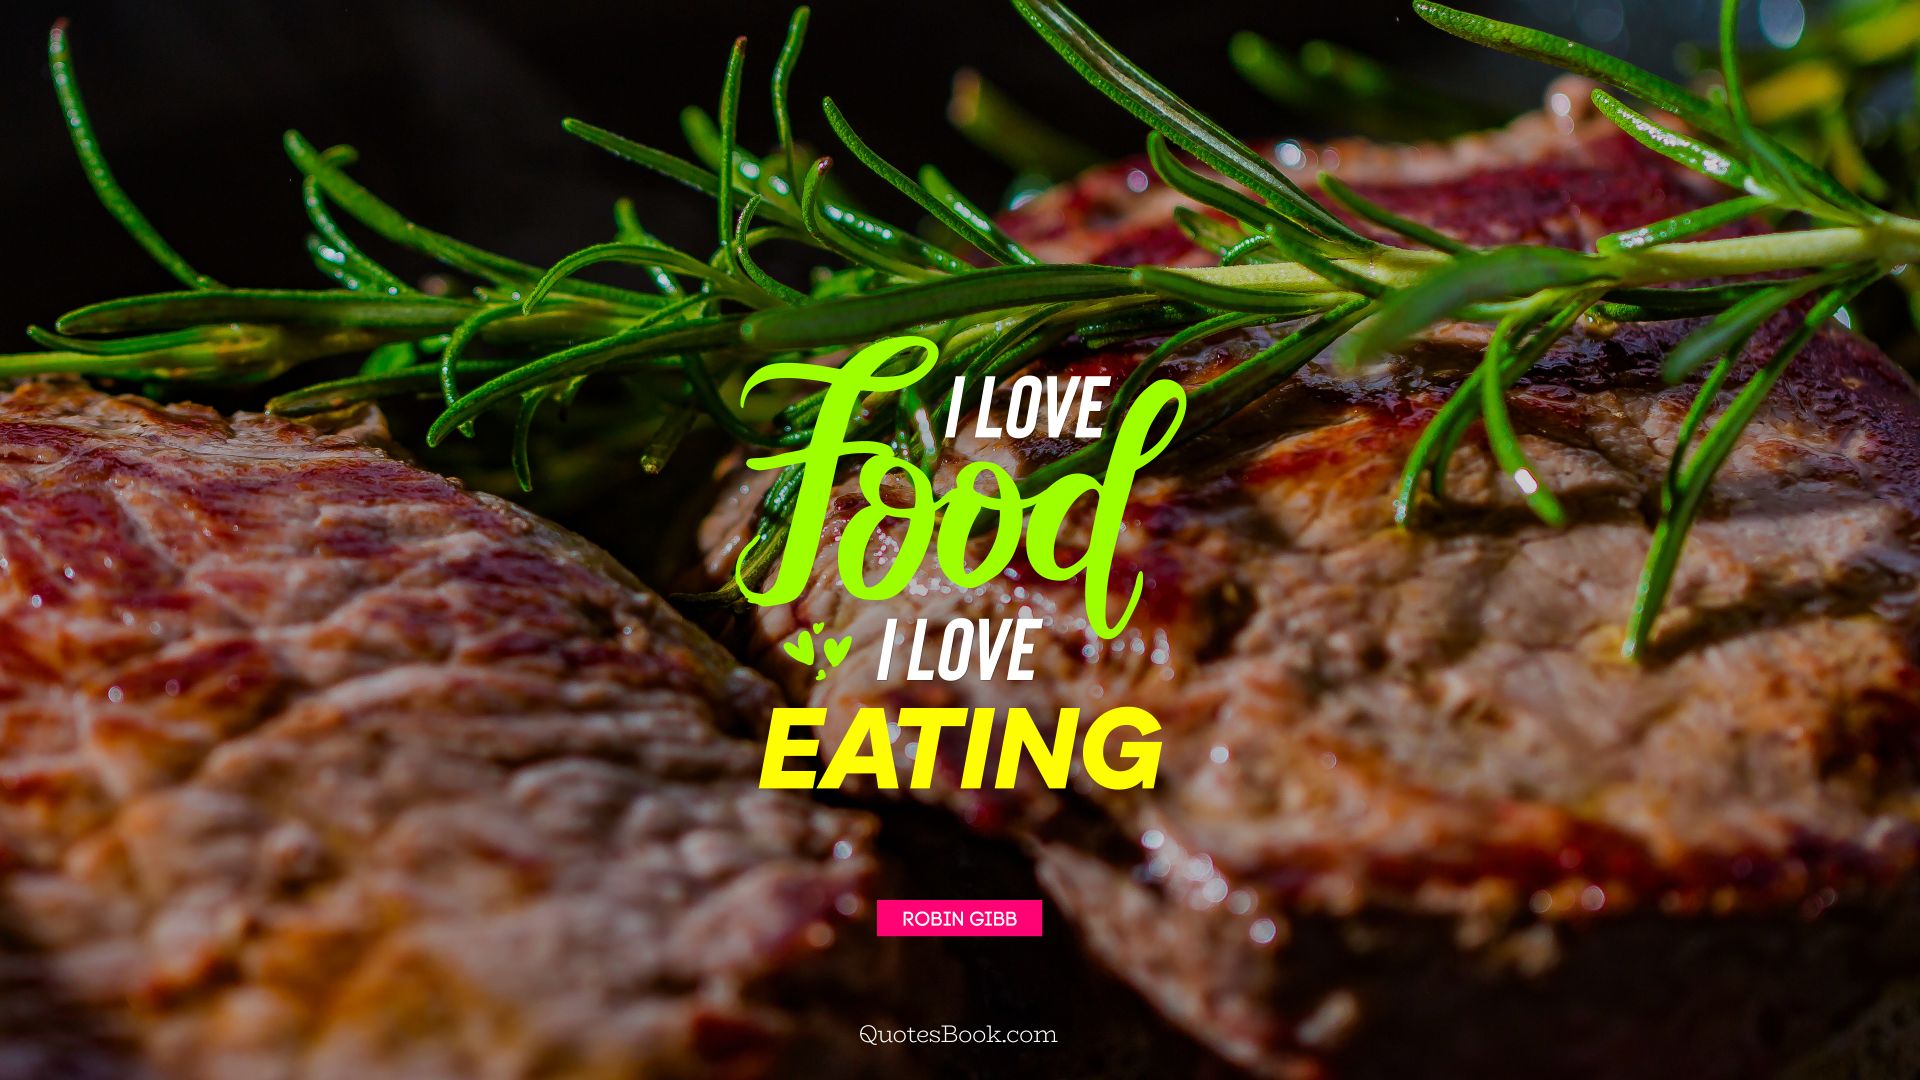 I love food i love eating. - Quote by Robin Gibb